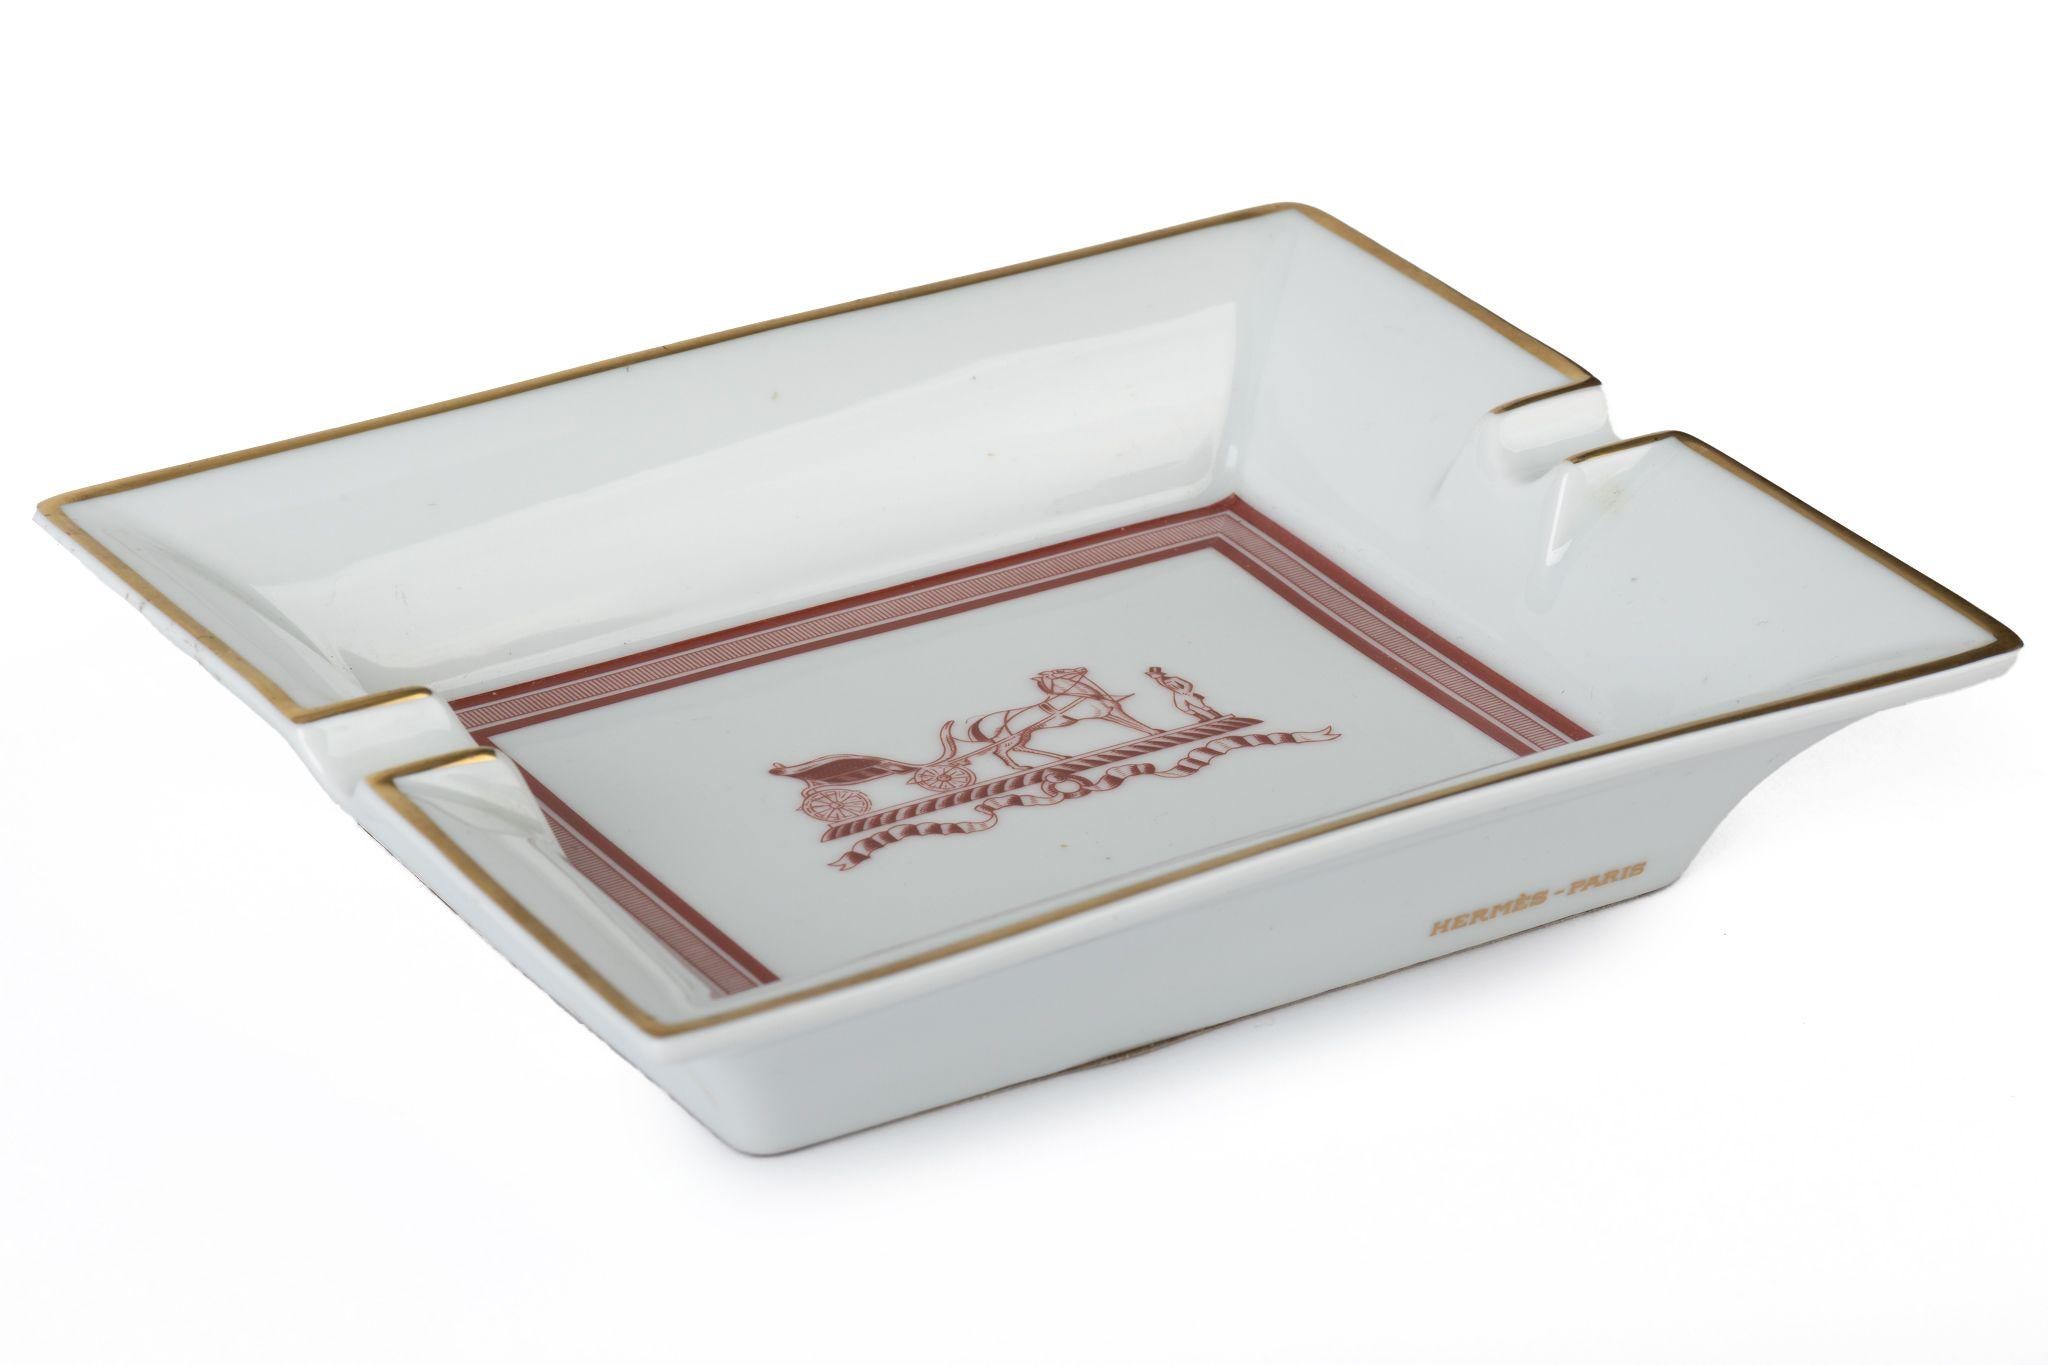 Hermès signature ashtray in white with a horse carriage and a charioteer design in red. Suede stamped bottom.